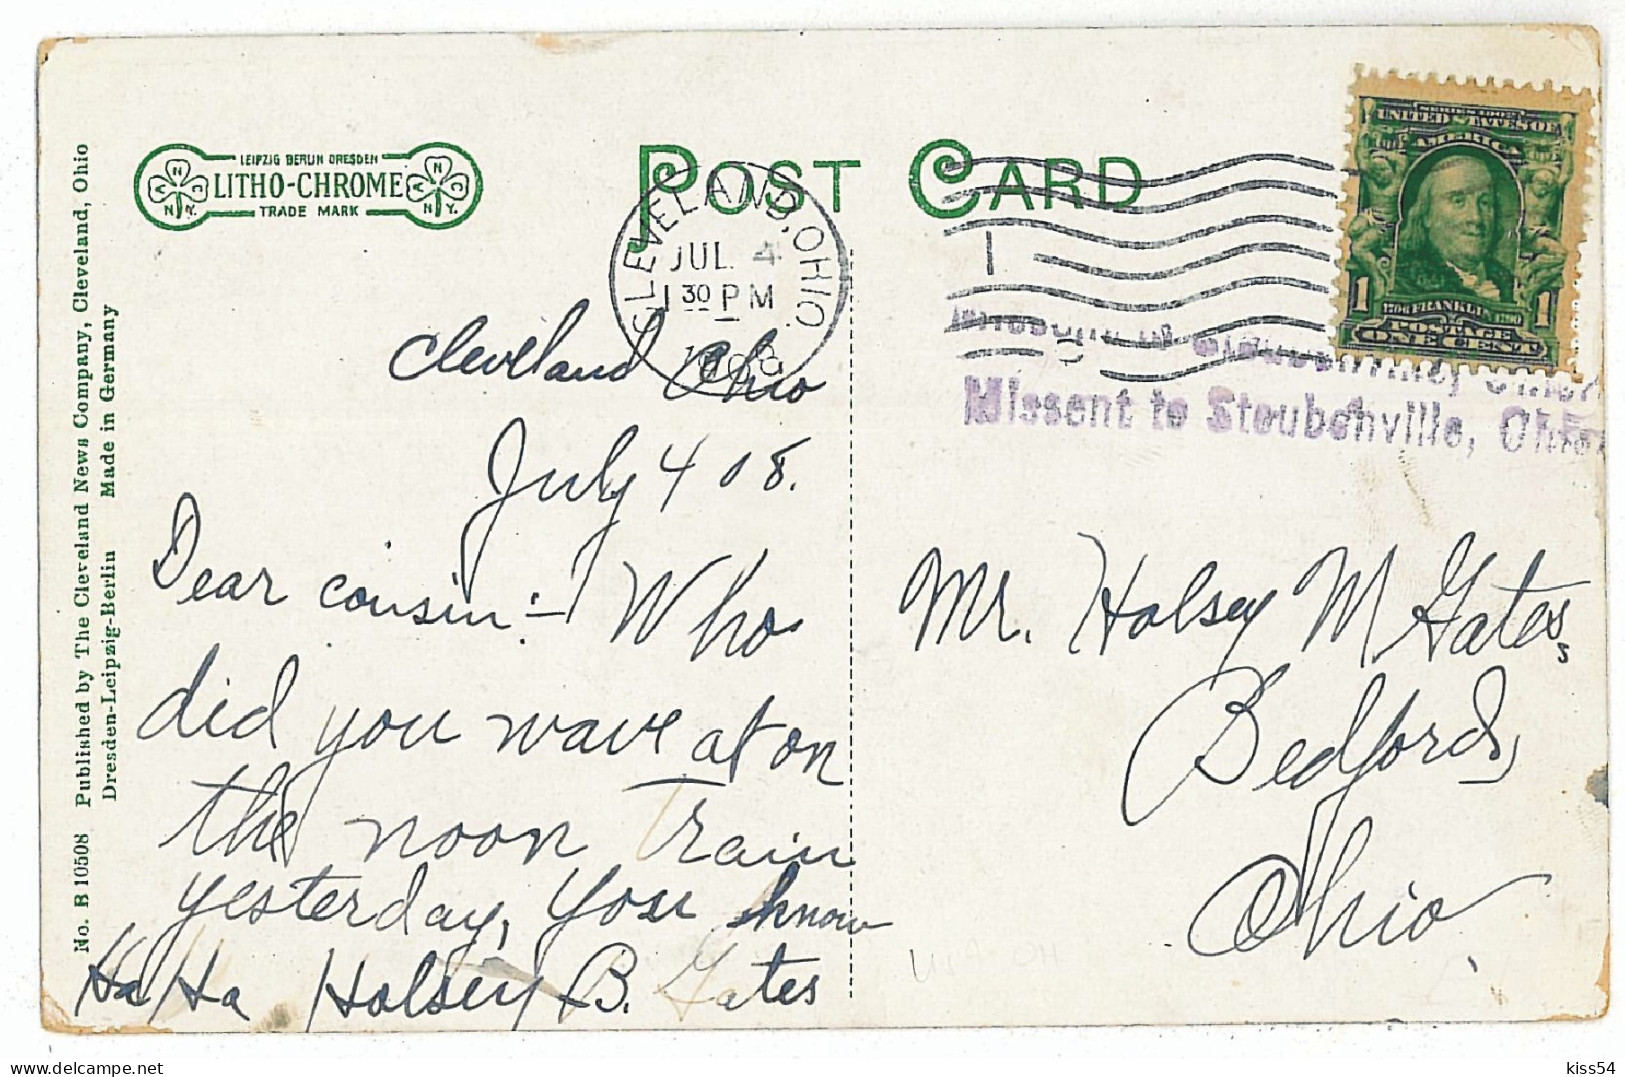 US 14 - 6045 CLEVELAND, Edgwater Beach - Old Postcard - Used - 1908 - Cleveland